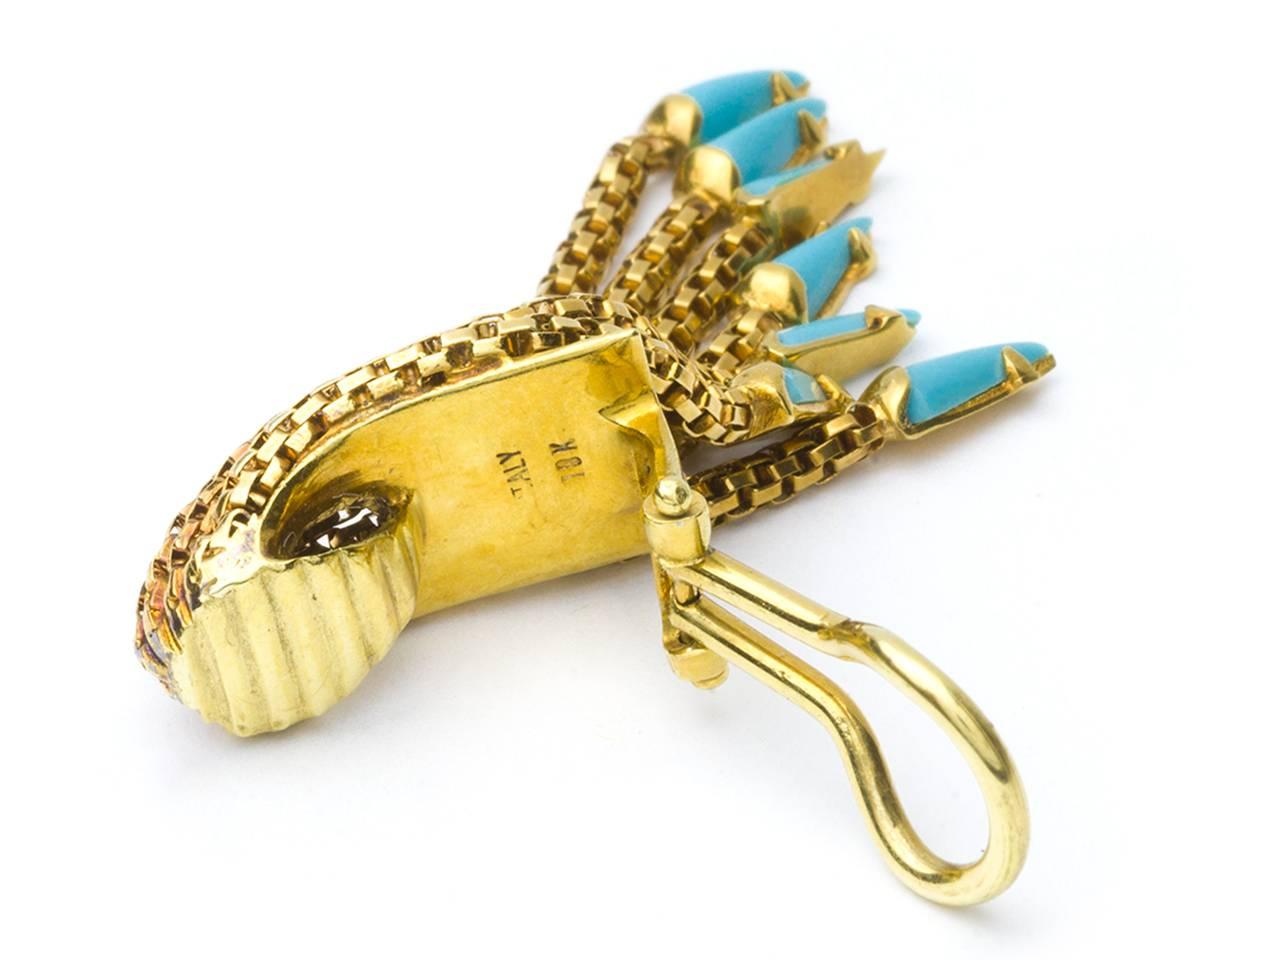 18k gold fringe earpendants set with turquoise drops. signed ITALY 18KT.